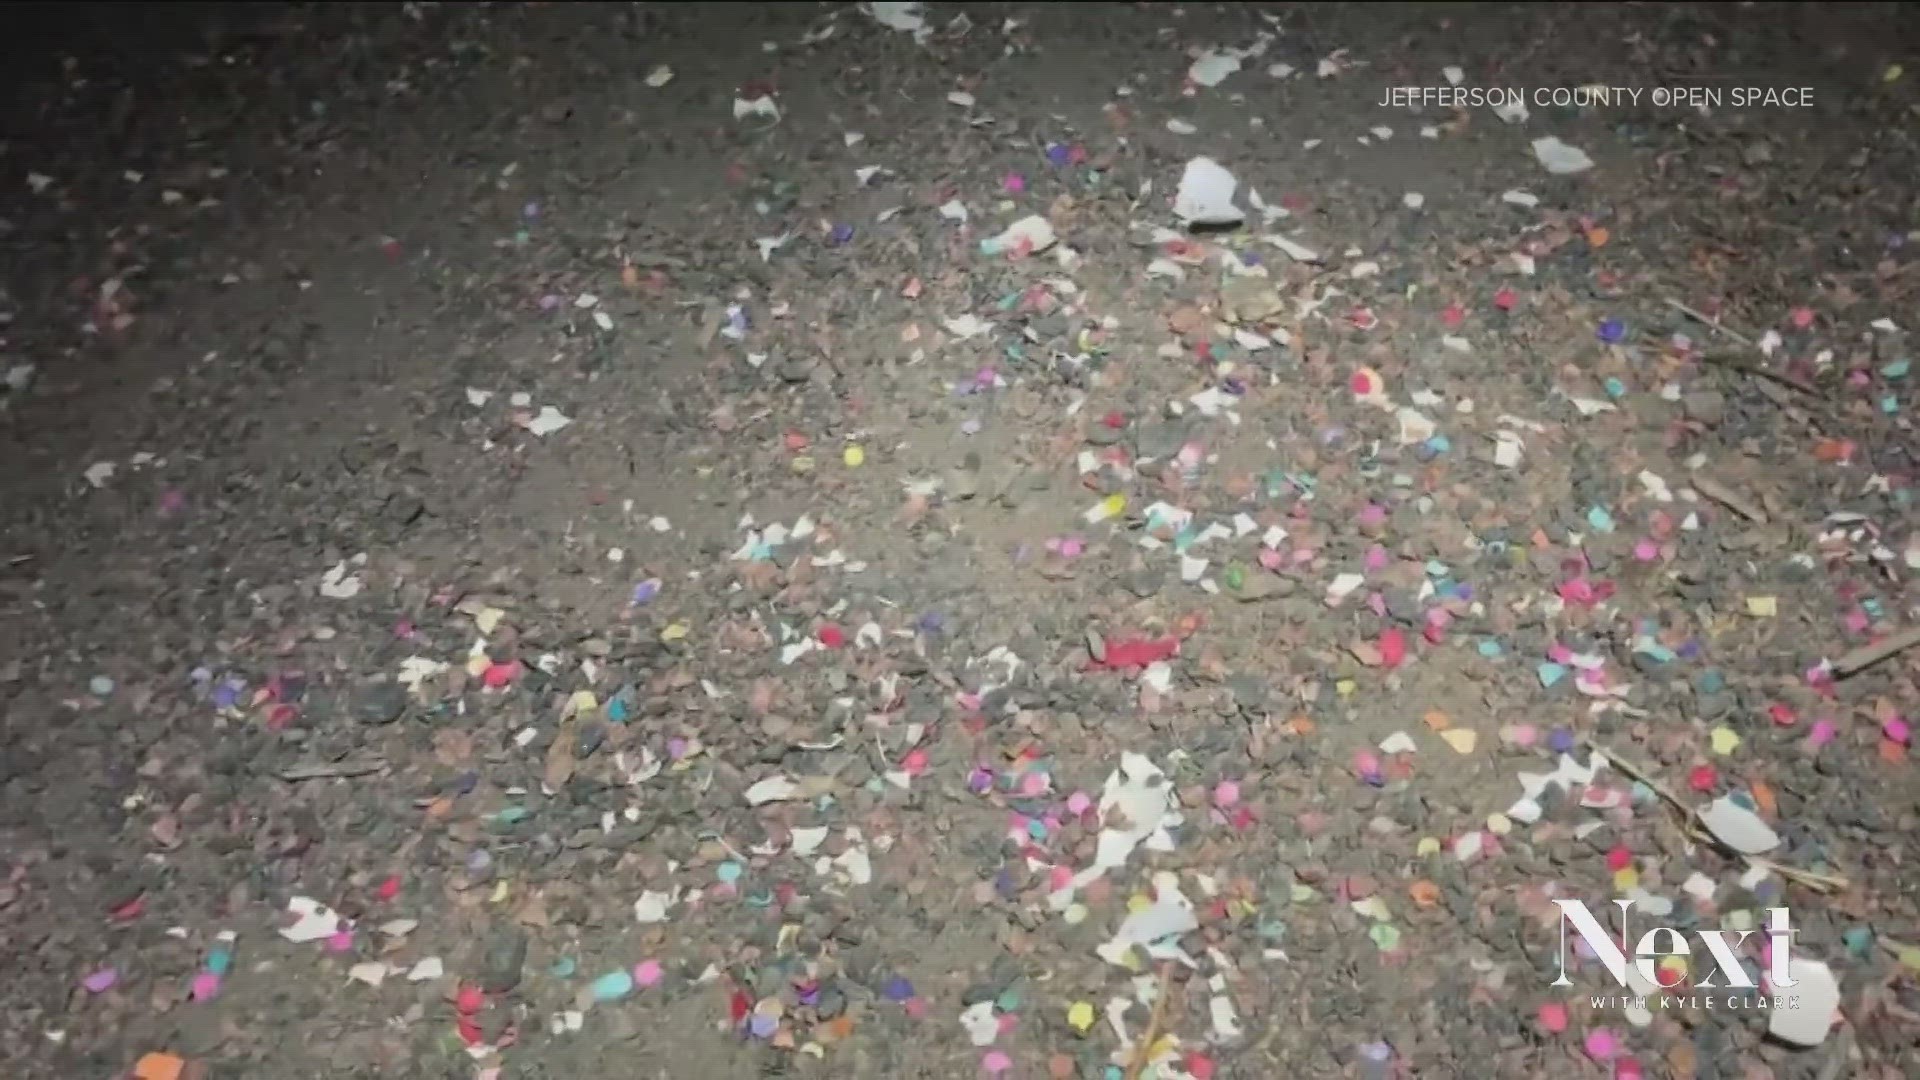 Video from picnic sites showed the litter left behind from Easter weekend on public lands. Rangers had to use rakes to slowly gather the small bits of trash.